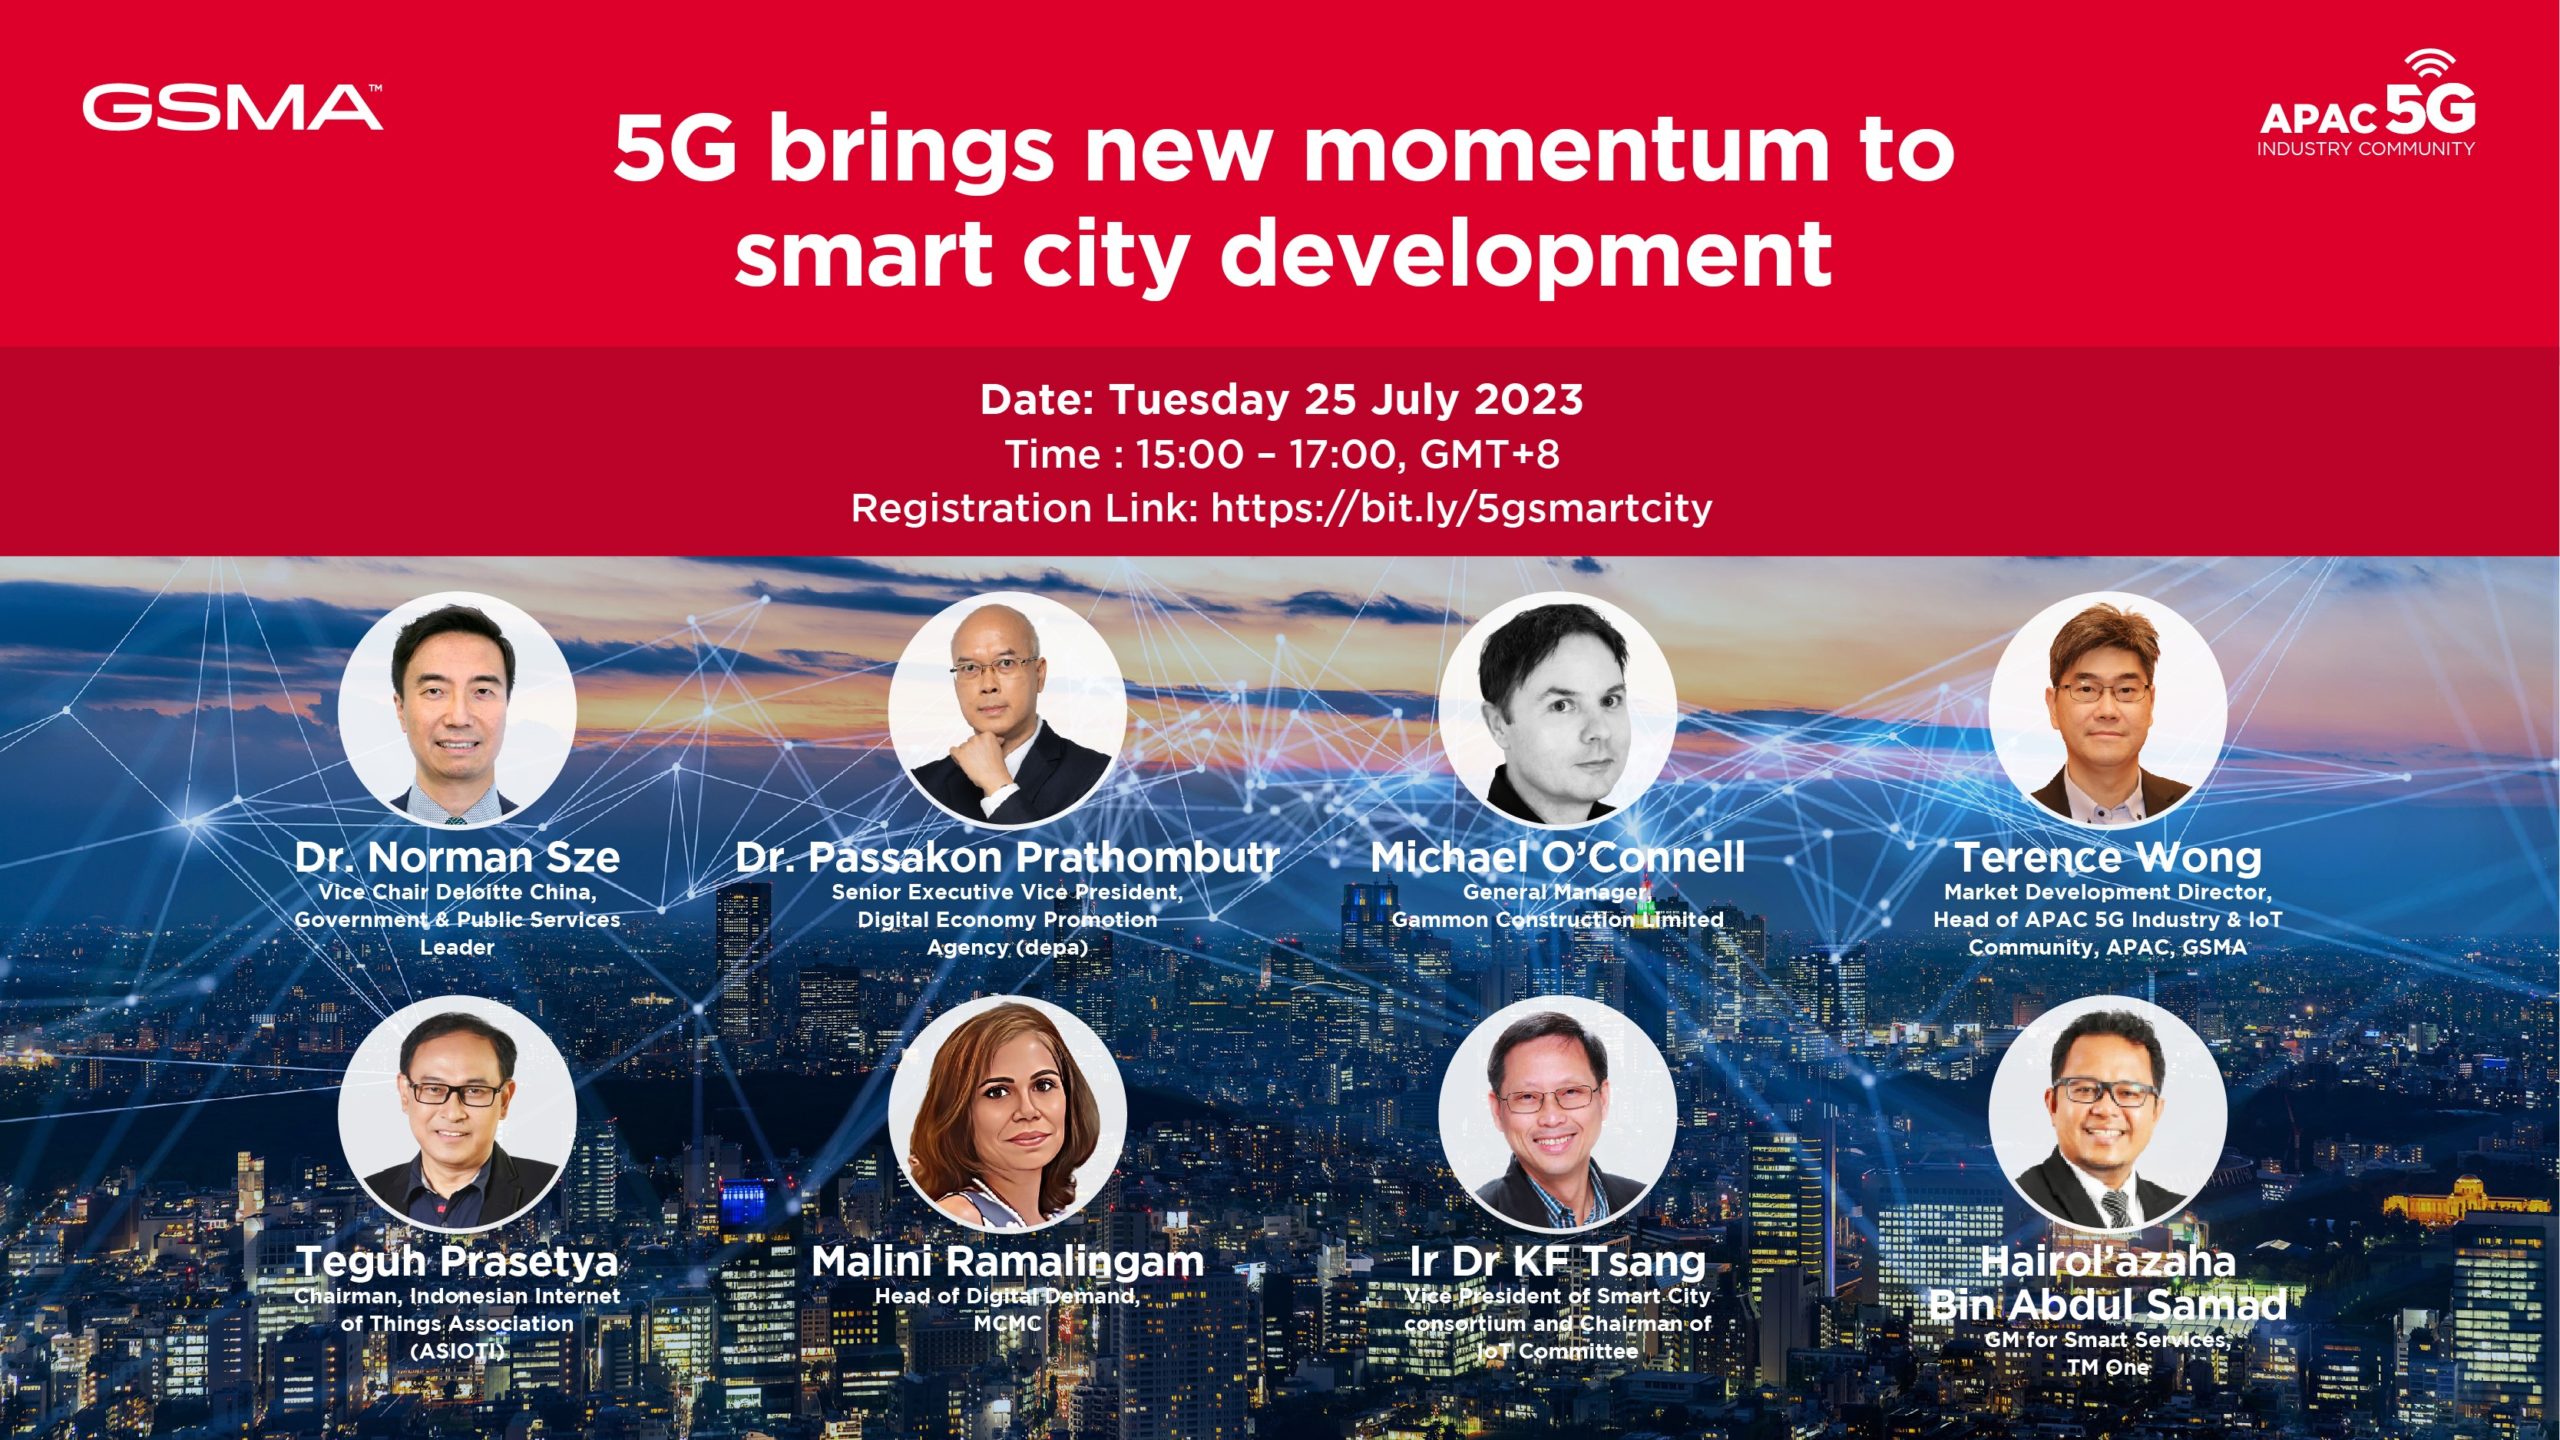 5G brings new momentum to smart city development – powered by GSMA APAC 5G Industry Community